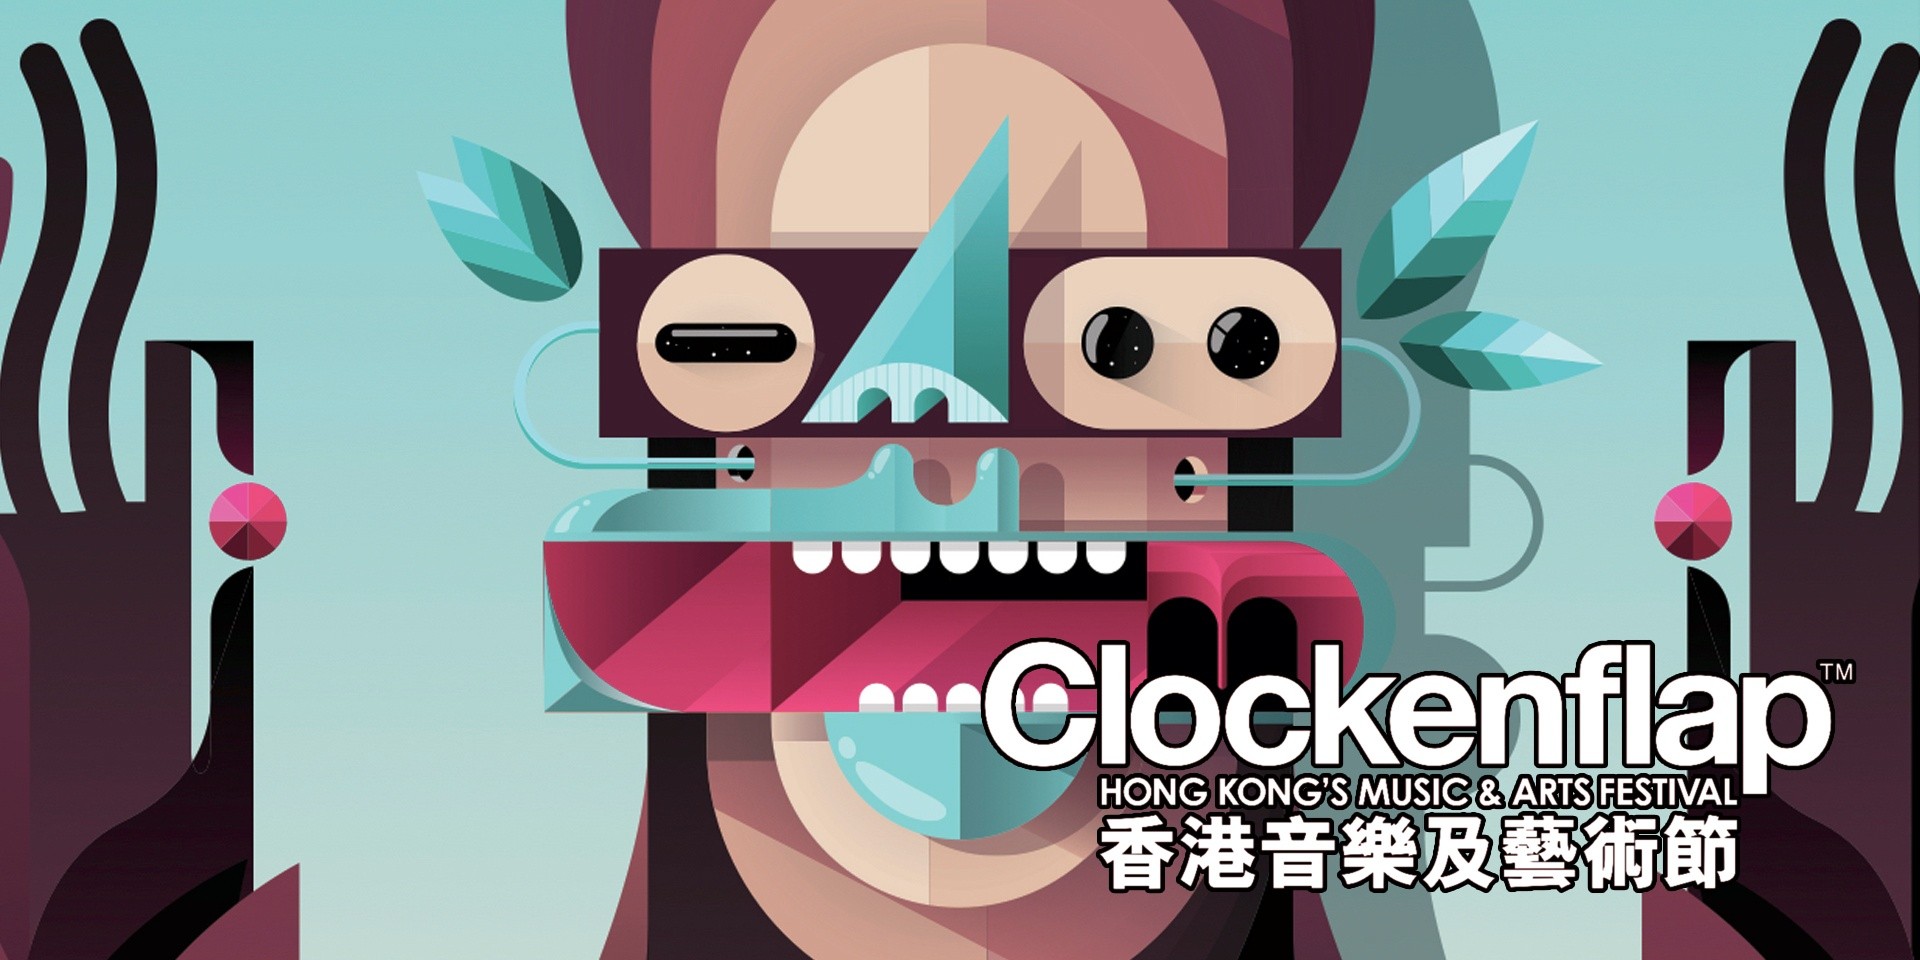 Here's the full schedule for Clockenflap 2015